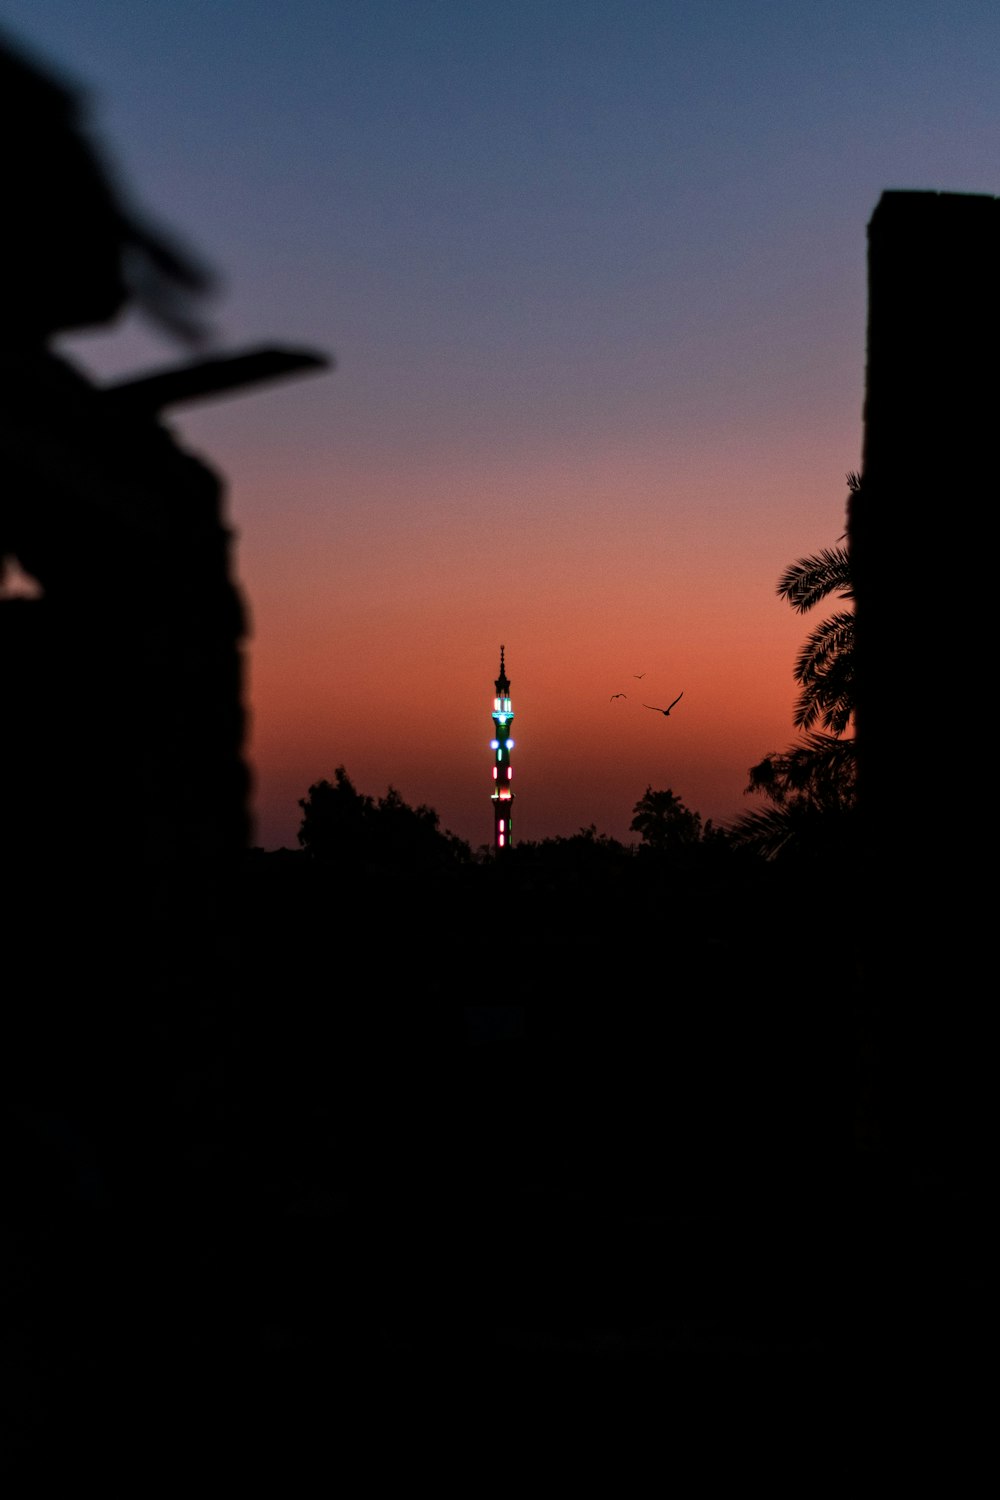 silhouette of trees and tower during nighttime